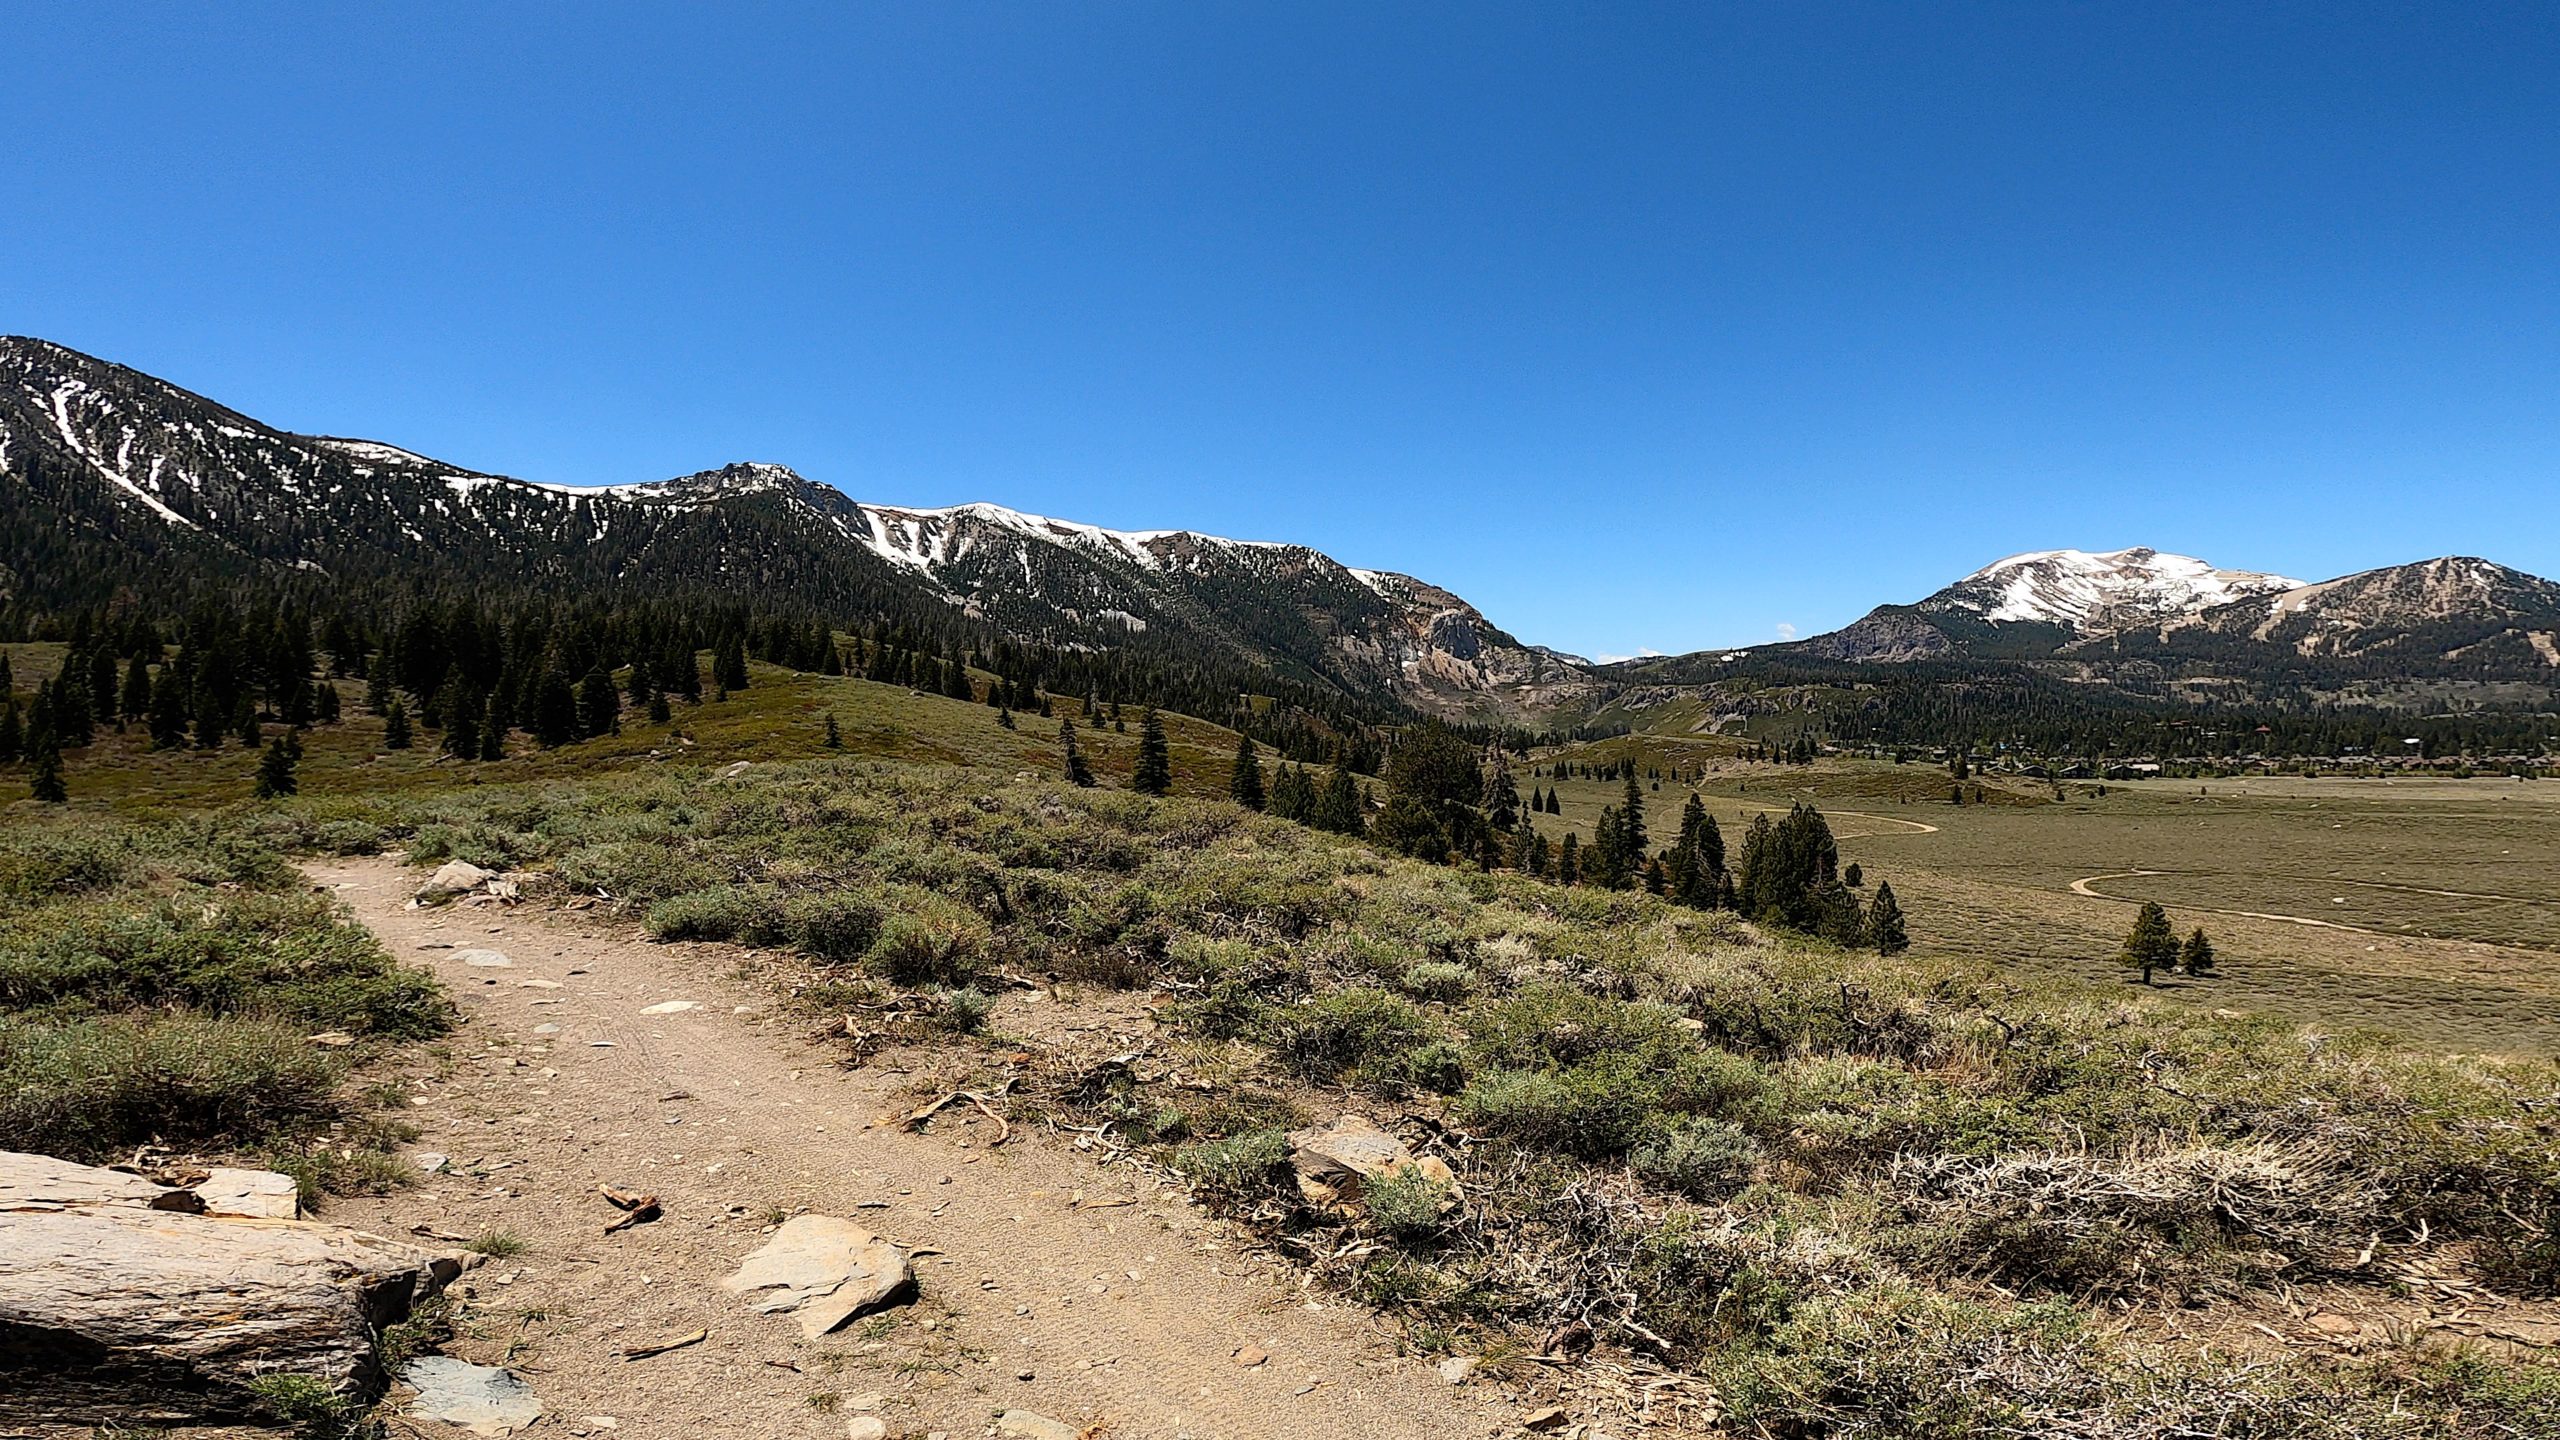 View of the Sherwins and Mammoth Mountain from lower Mammoth Rock Trail - Photo by Snowman